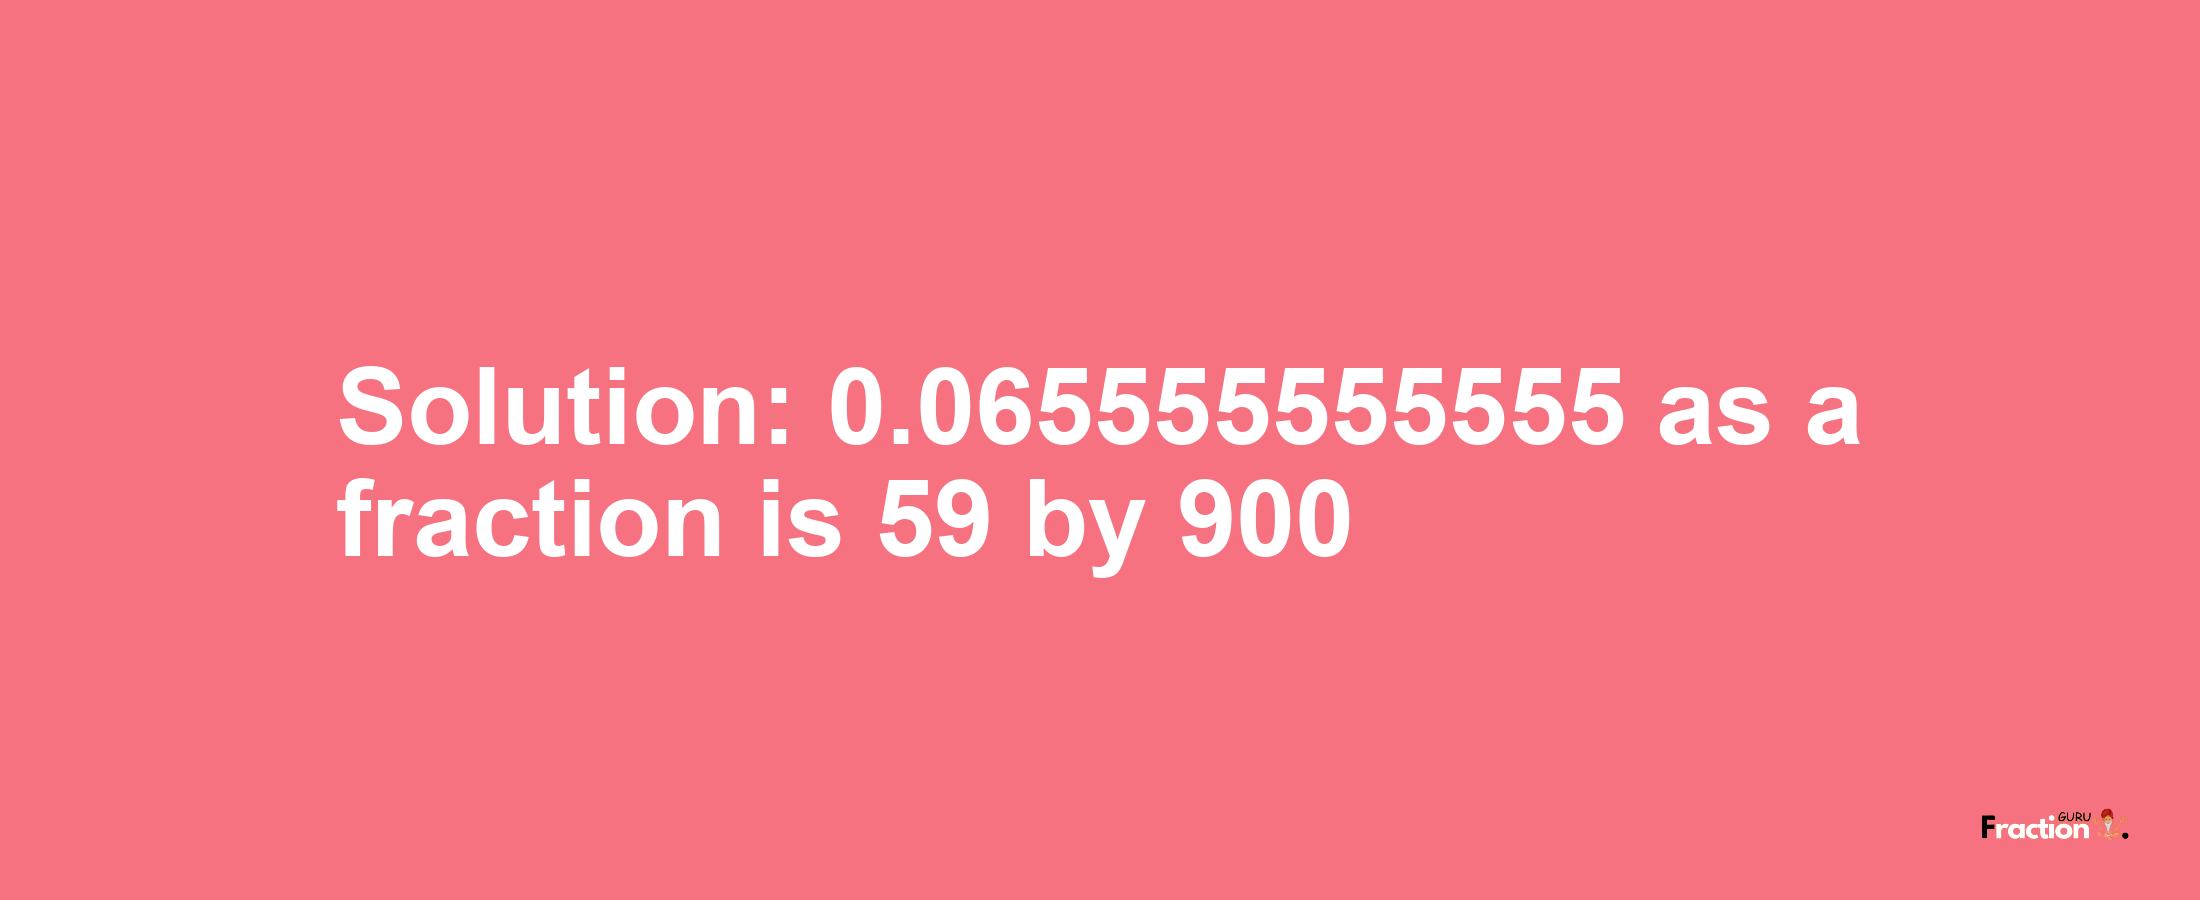 Solution:0.065555555555 as a fraction is 59/900